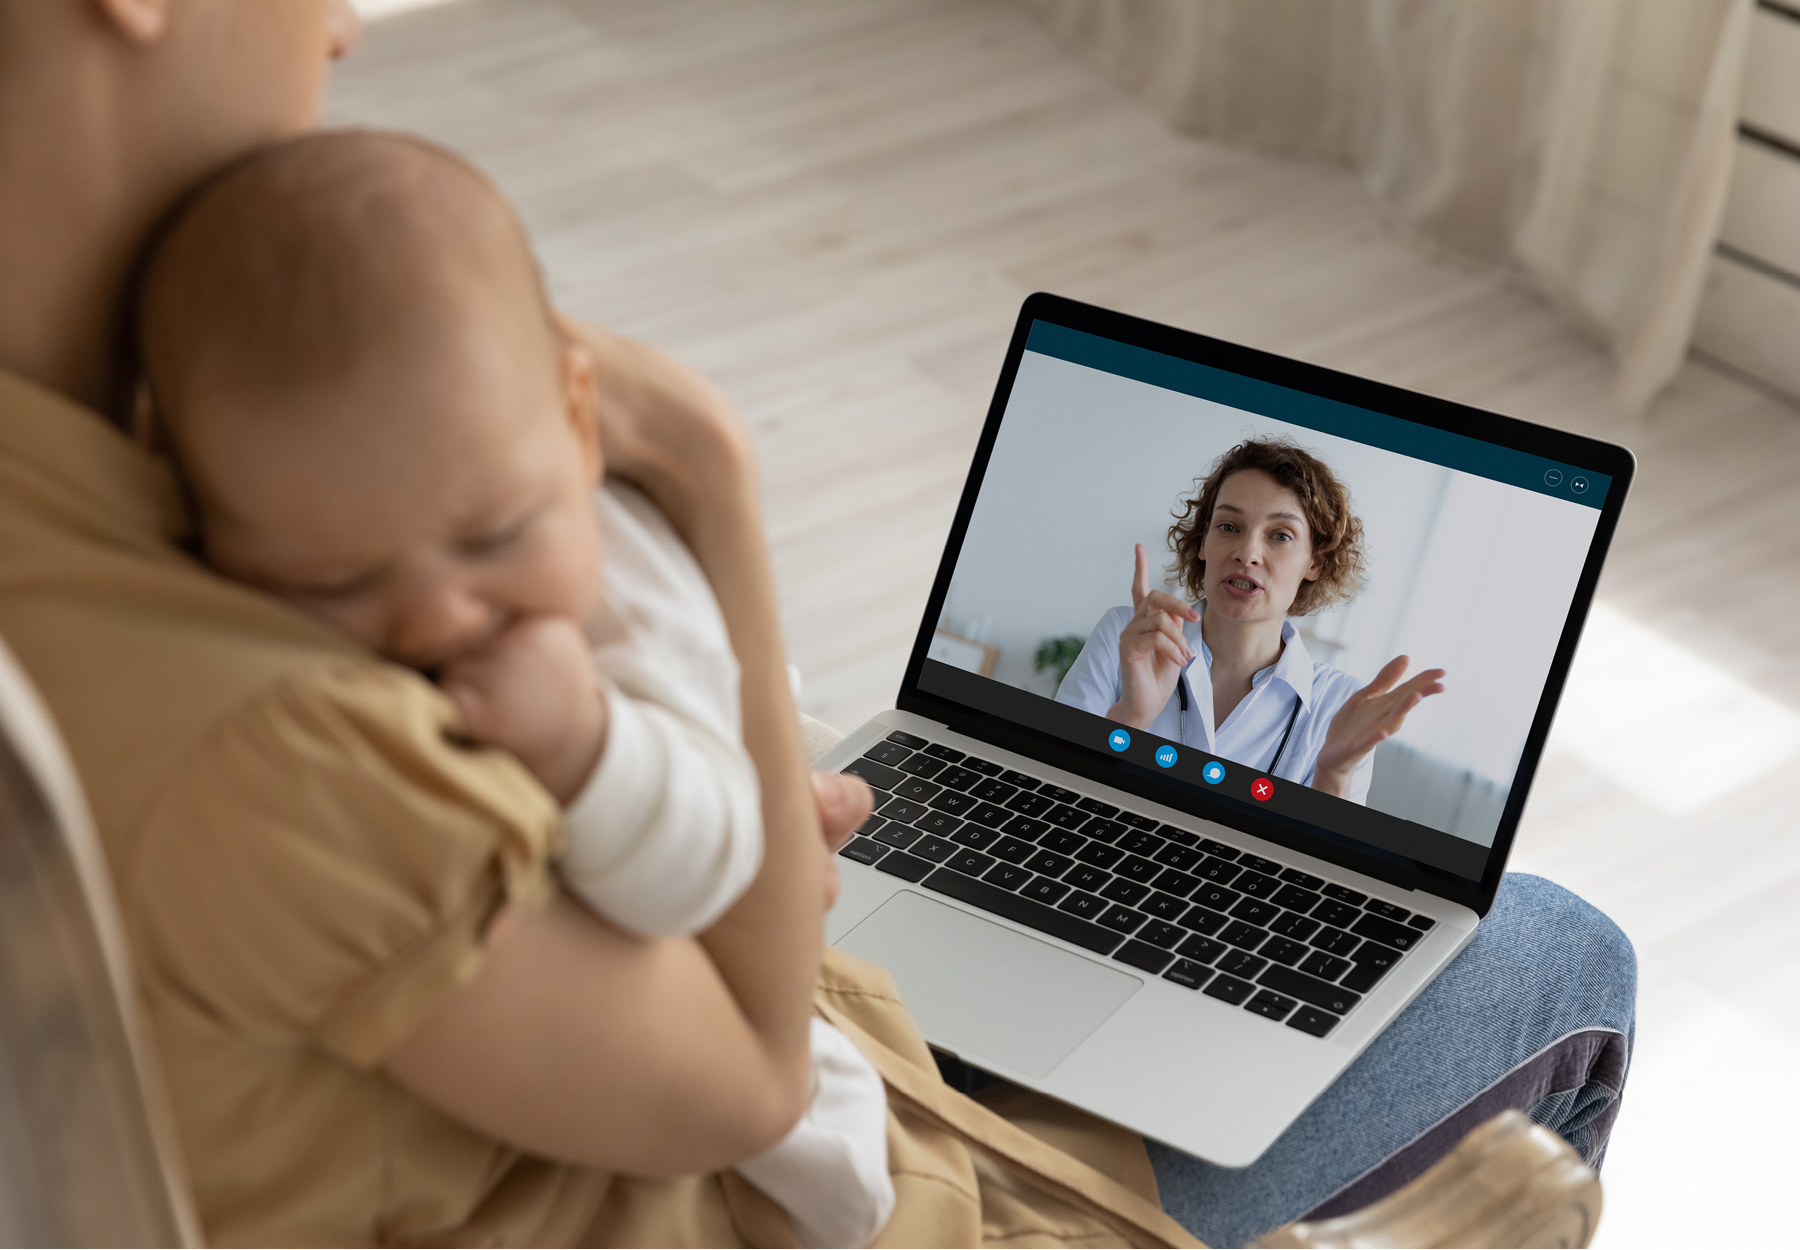 Mother holding baby while doing a telehealth call on her laptop with her doctor. iStock image.